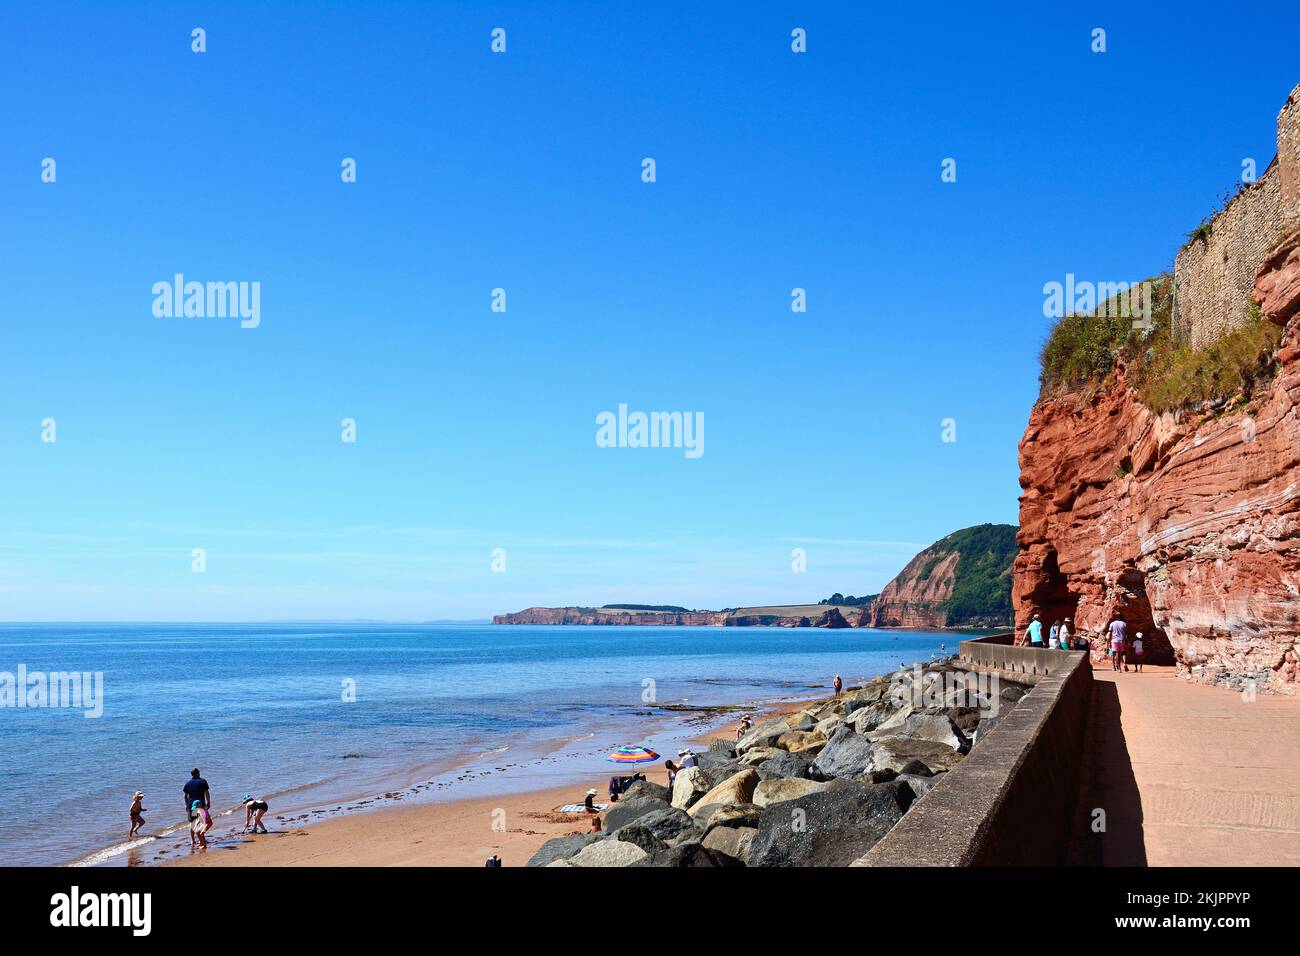 View along the sandy beach towards the cliffs, Sidmouth, Devon, UK, Europe. Stock Photo